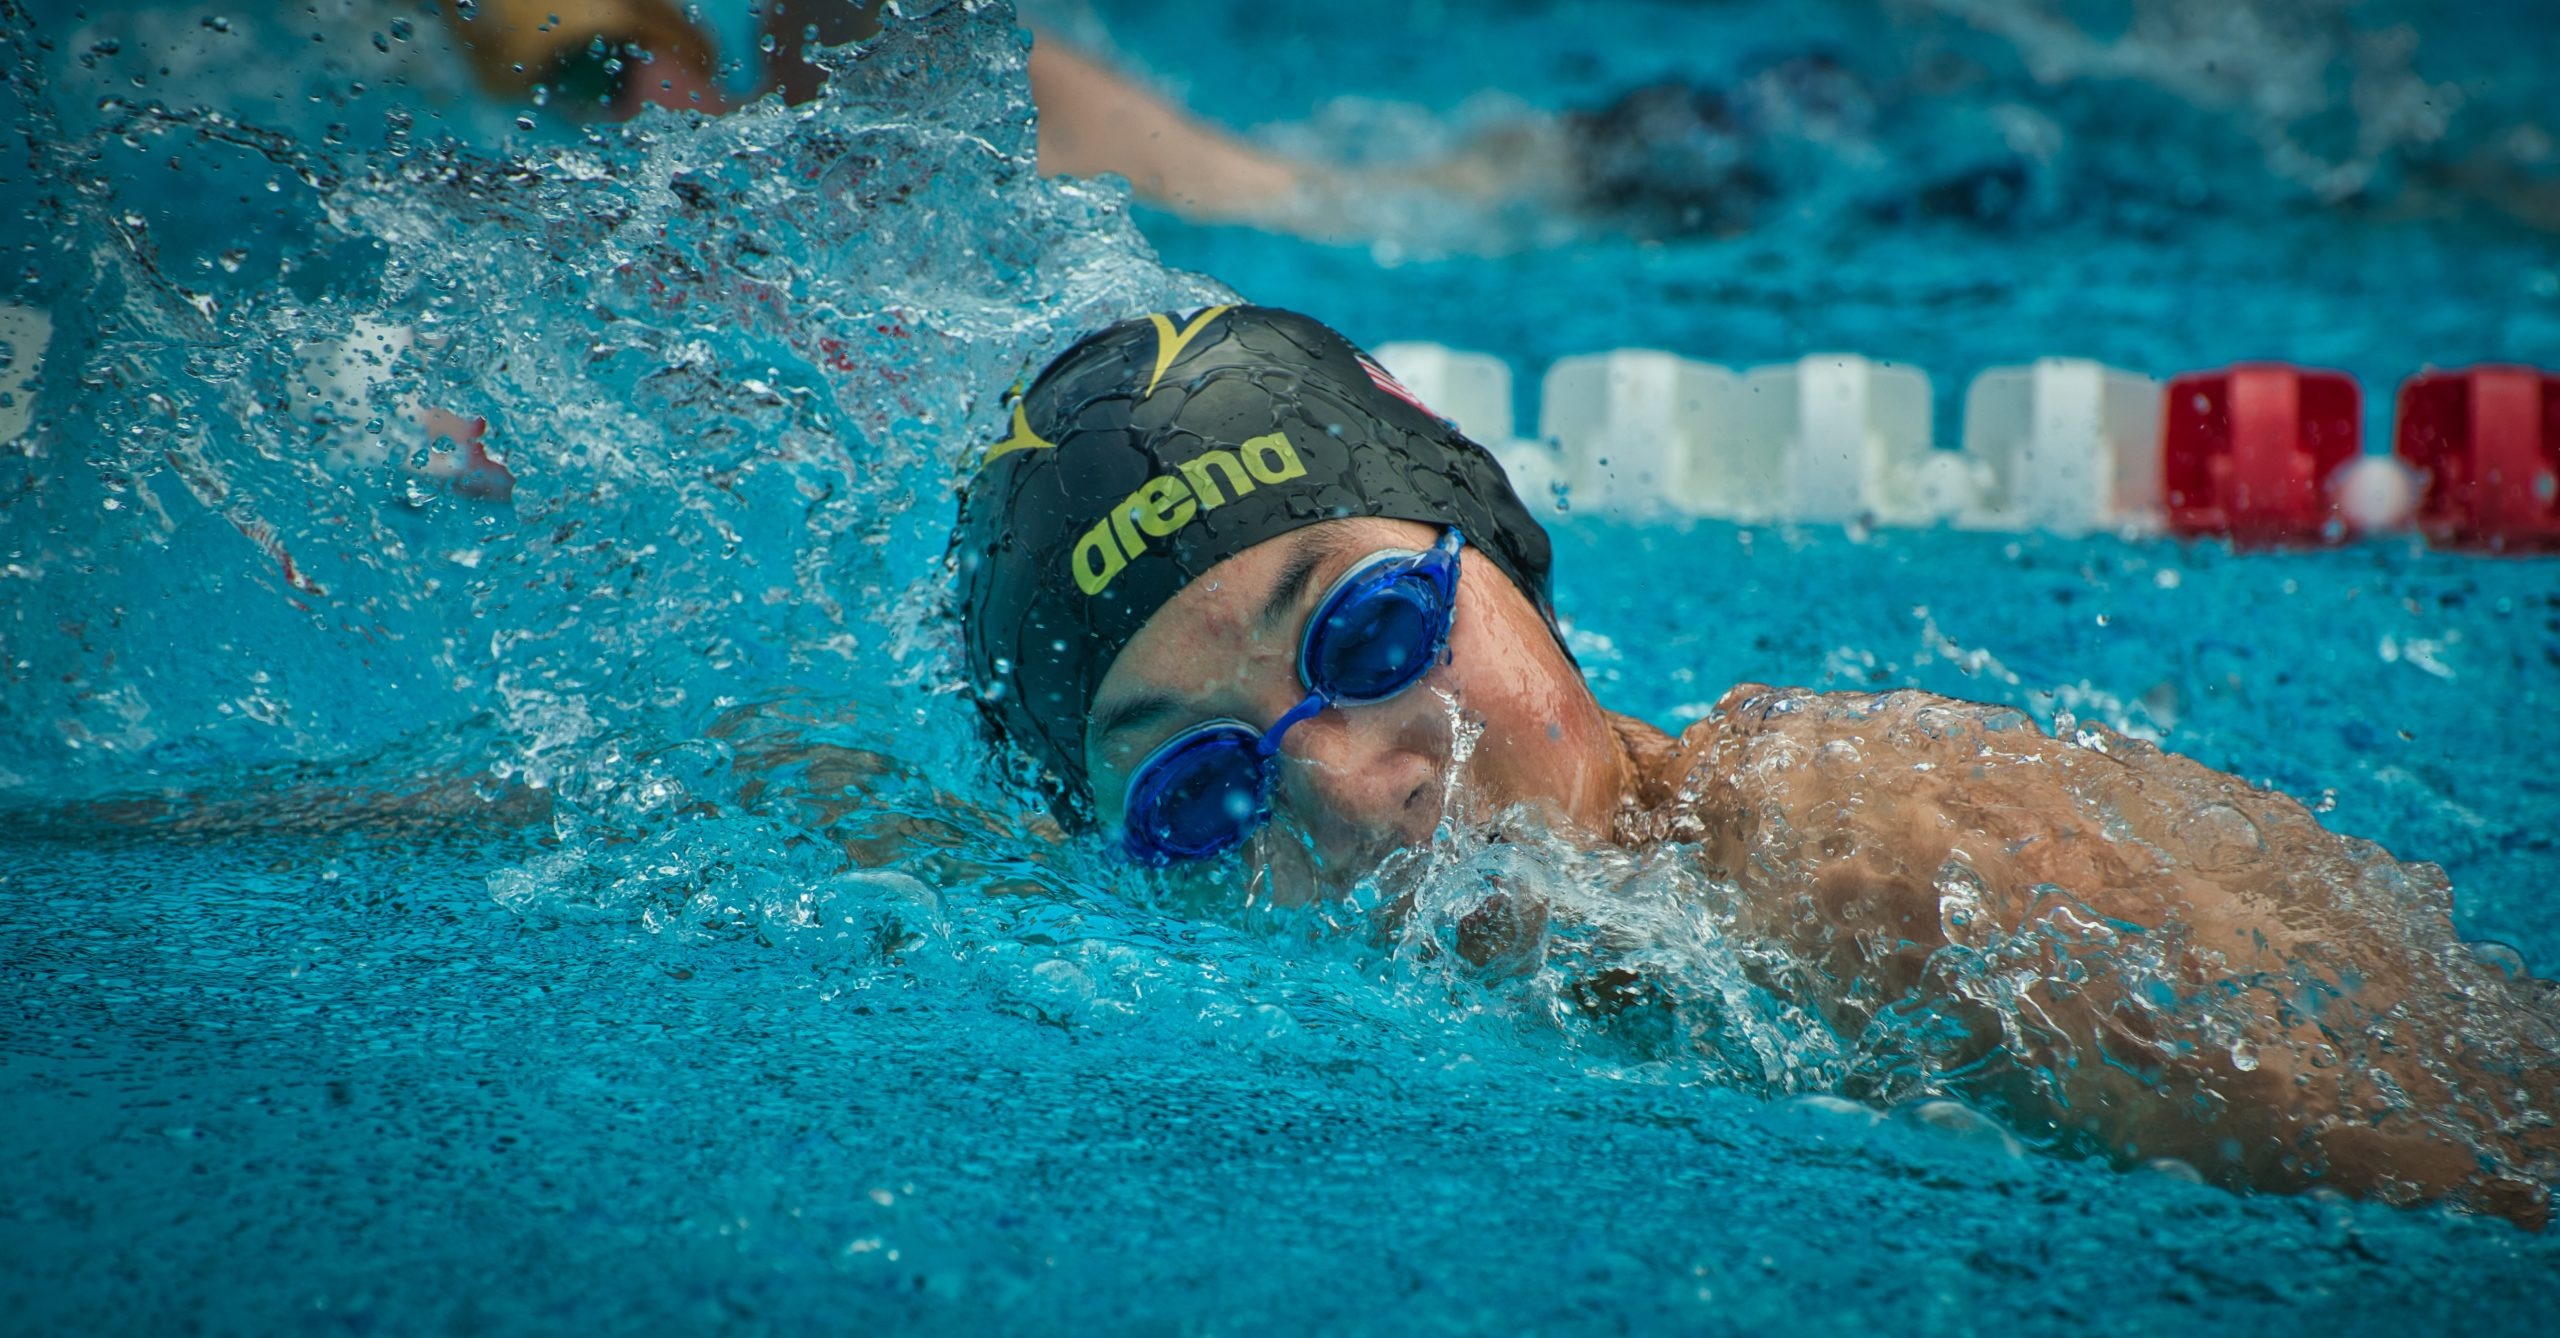 Swimming: A competitive front crawl women's event, Water sports and recreation. 2560x1340 HD Background.